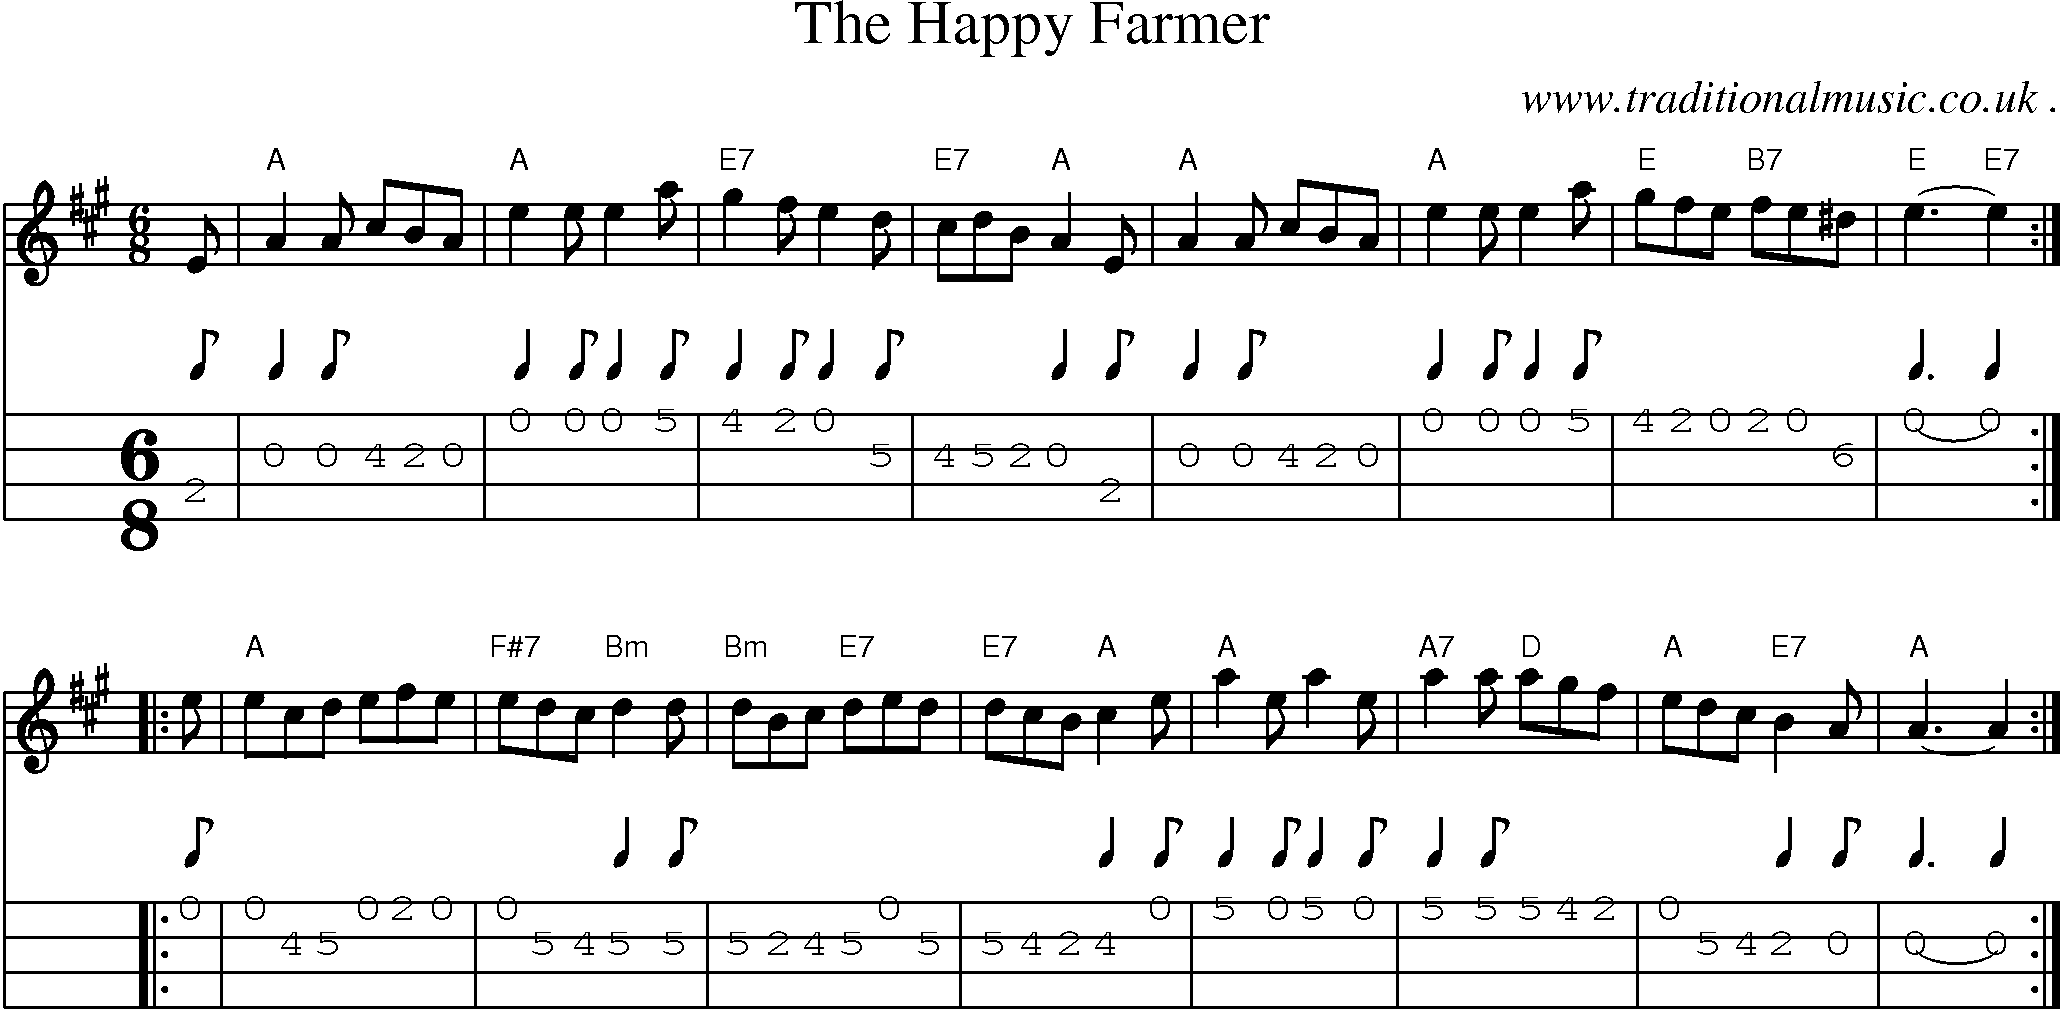 Sheet-music  score, Chords and Mandolin Tabs for The Happy Farmer